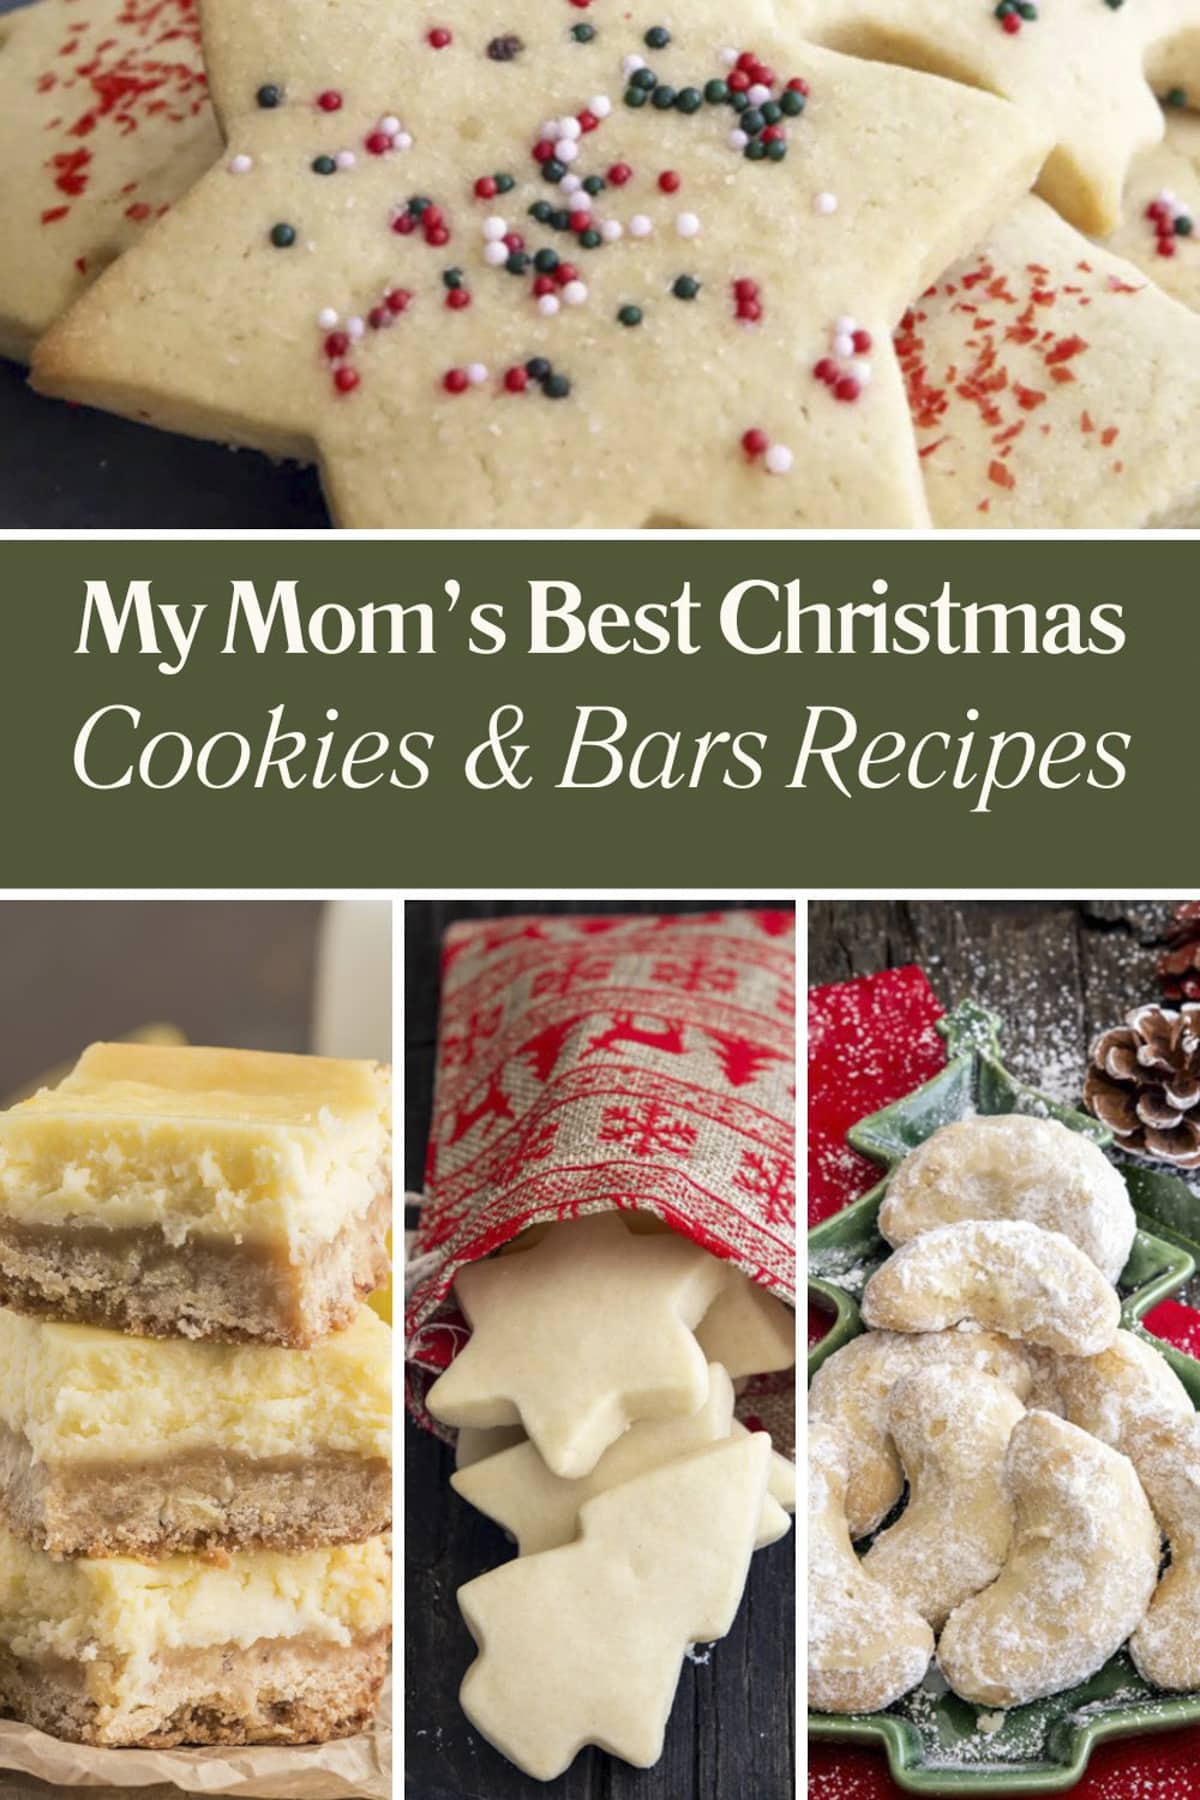 My Mom’s Best Christmas Cookies and Bars